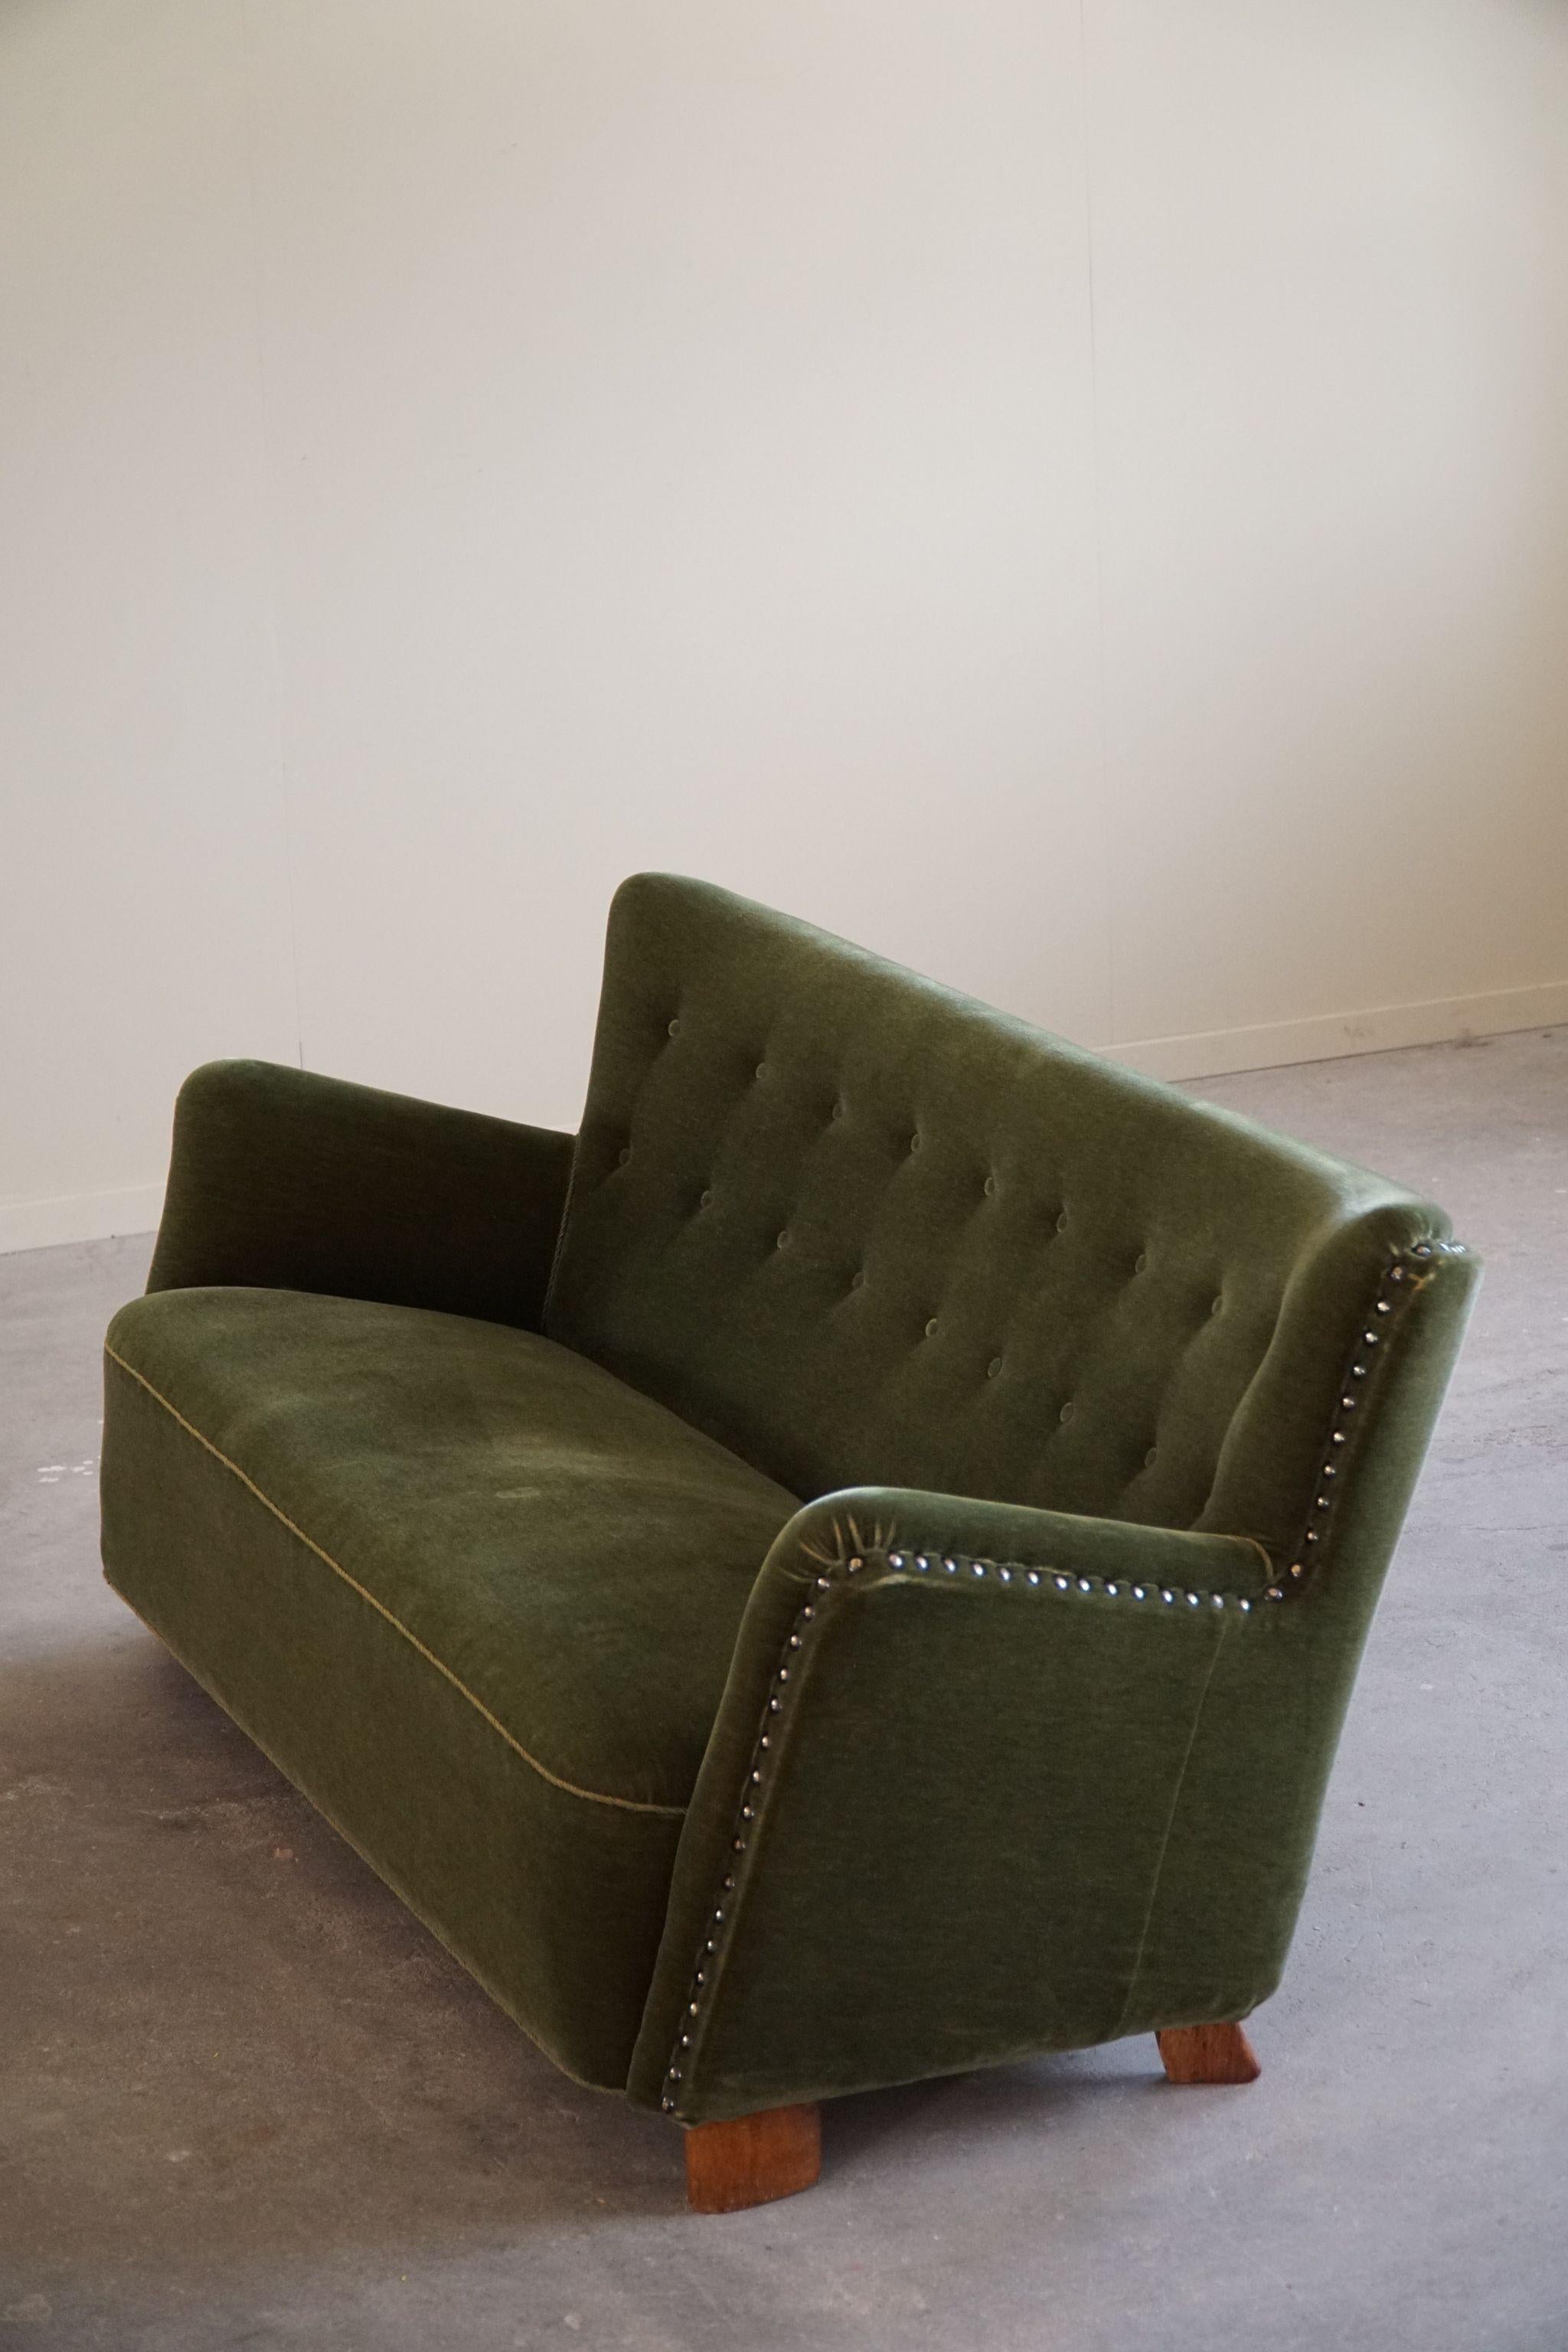 This beautiful three seater sofa in the original green velvet embodies the Danish Mid Century Modern design from the 1940s. Its lush green velvet upholstery exudes luxury and comfort, while the oak legs provide stability and a touch of natural